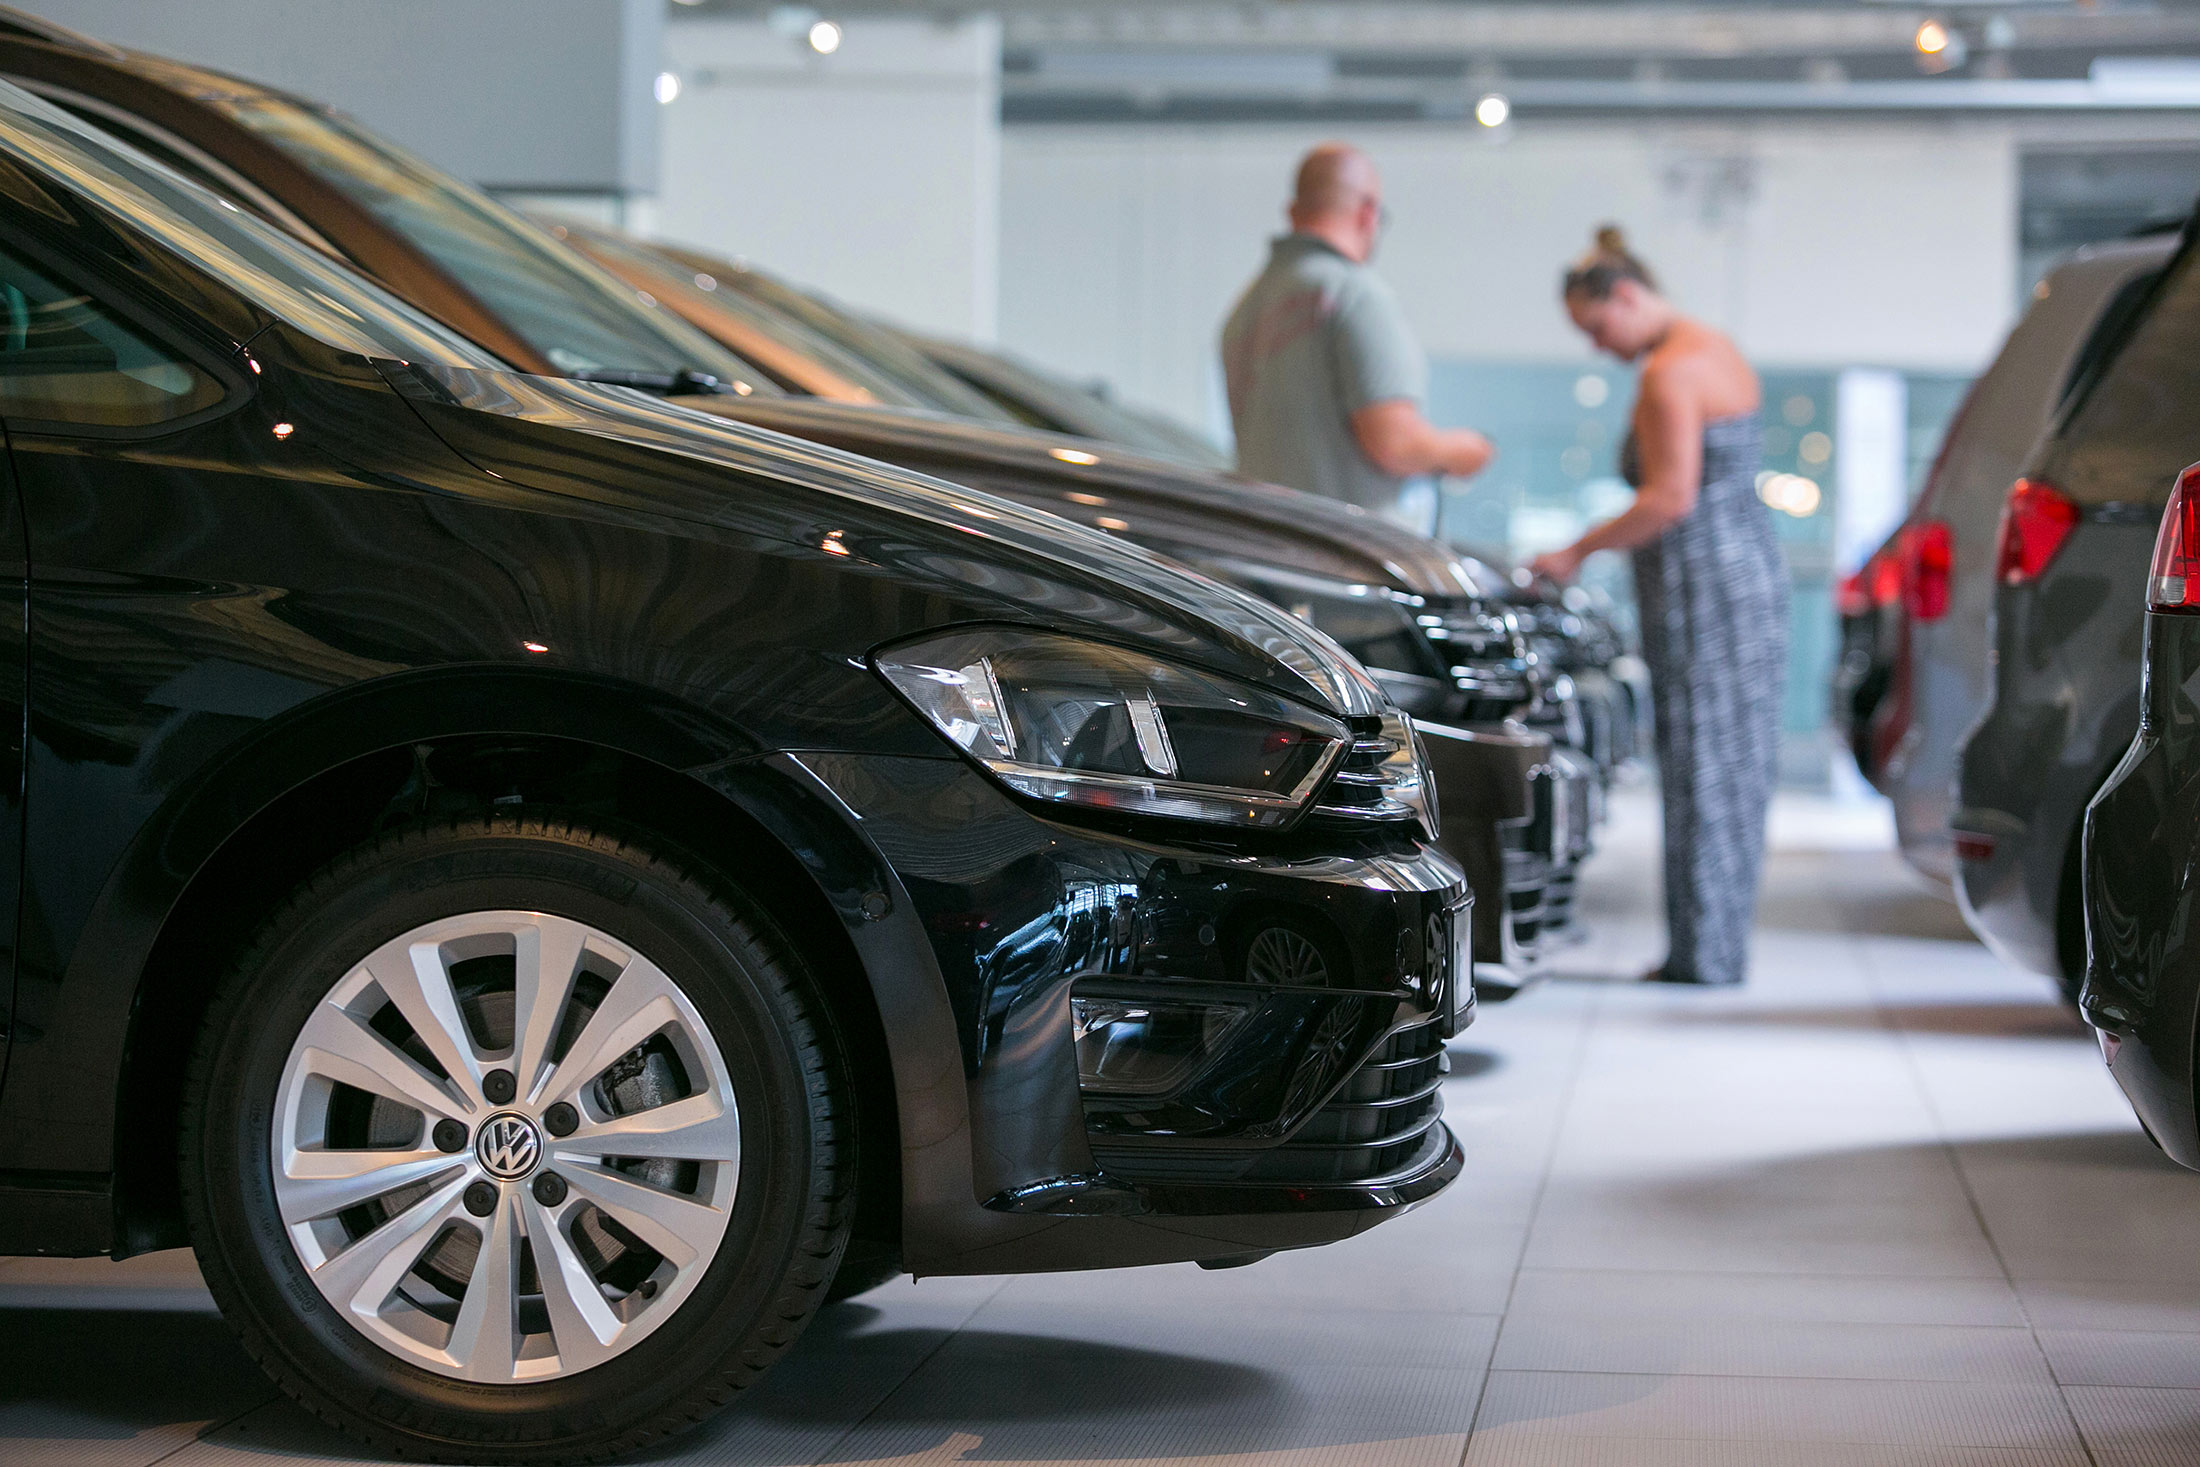 Customers browse used cars inside the Volkswagen AG automobile showroom in Berlin, Germany, on Aug. 6, 2015.
